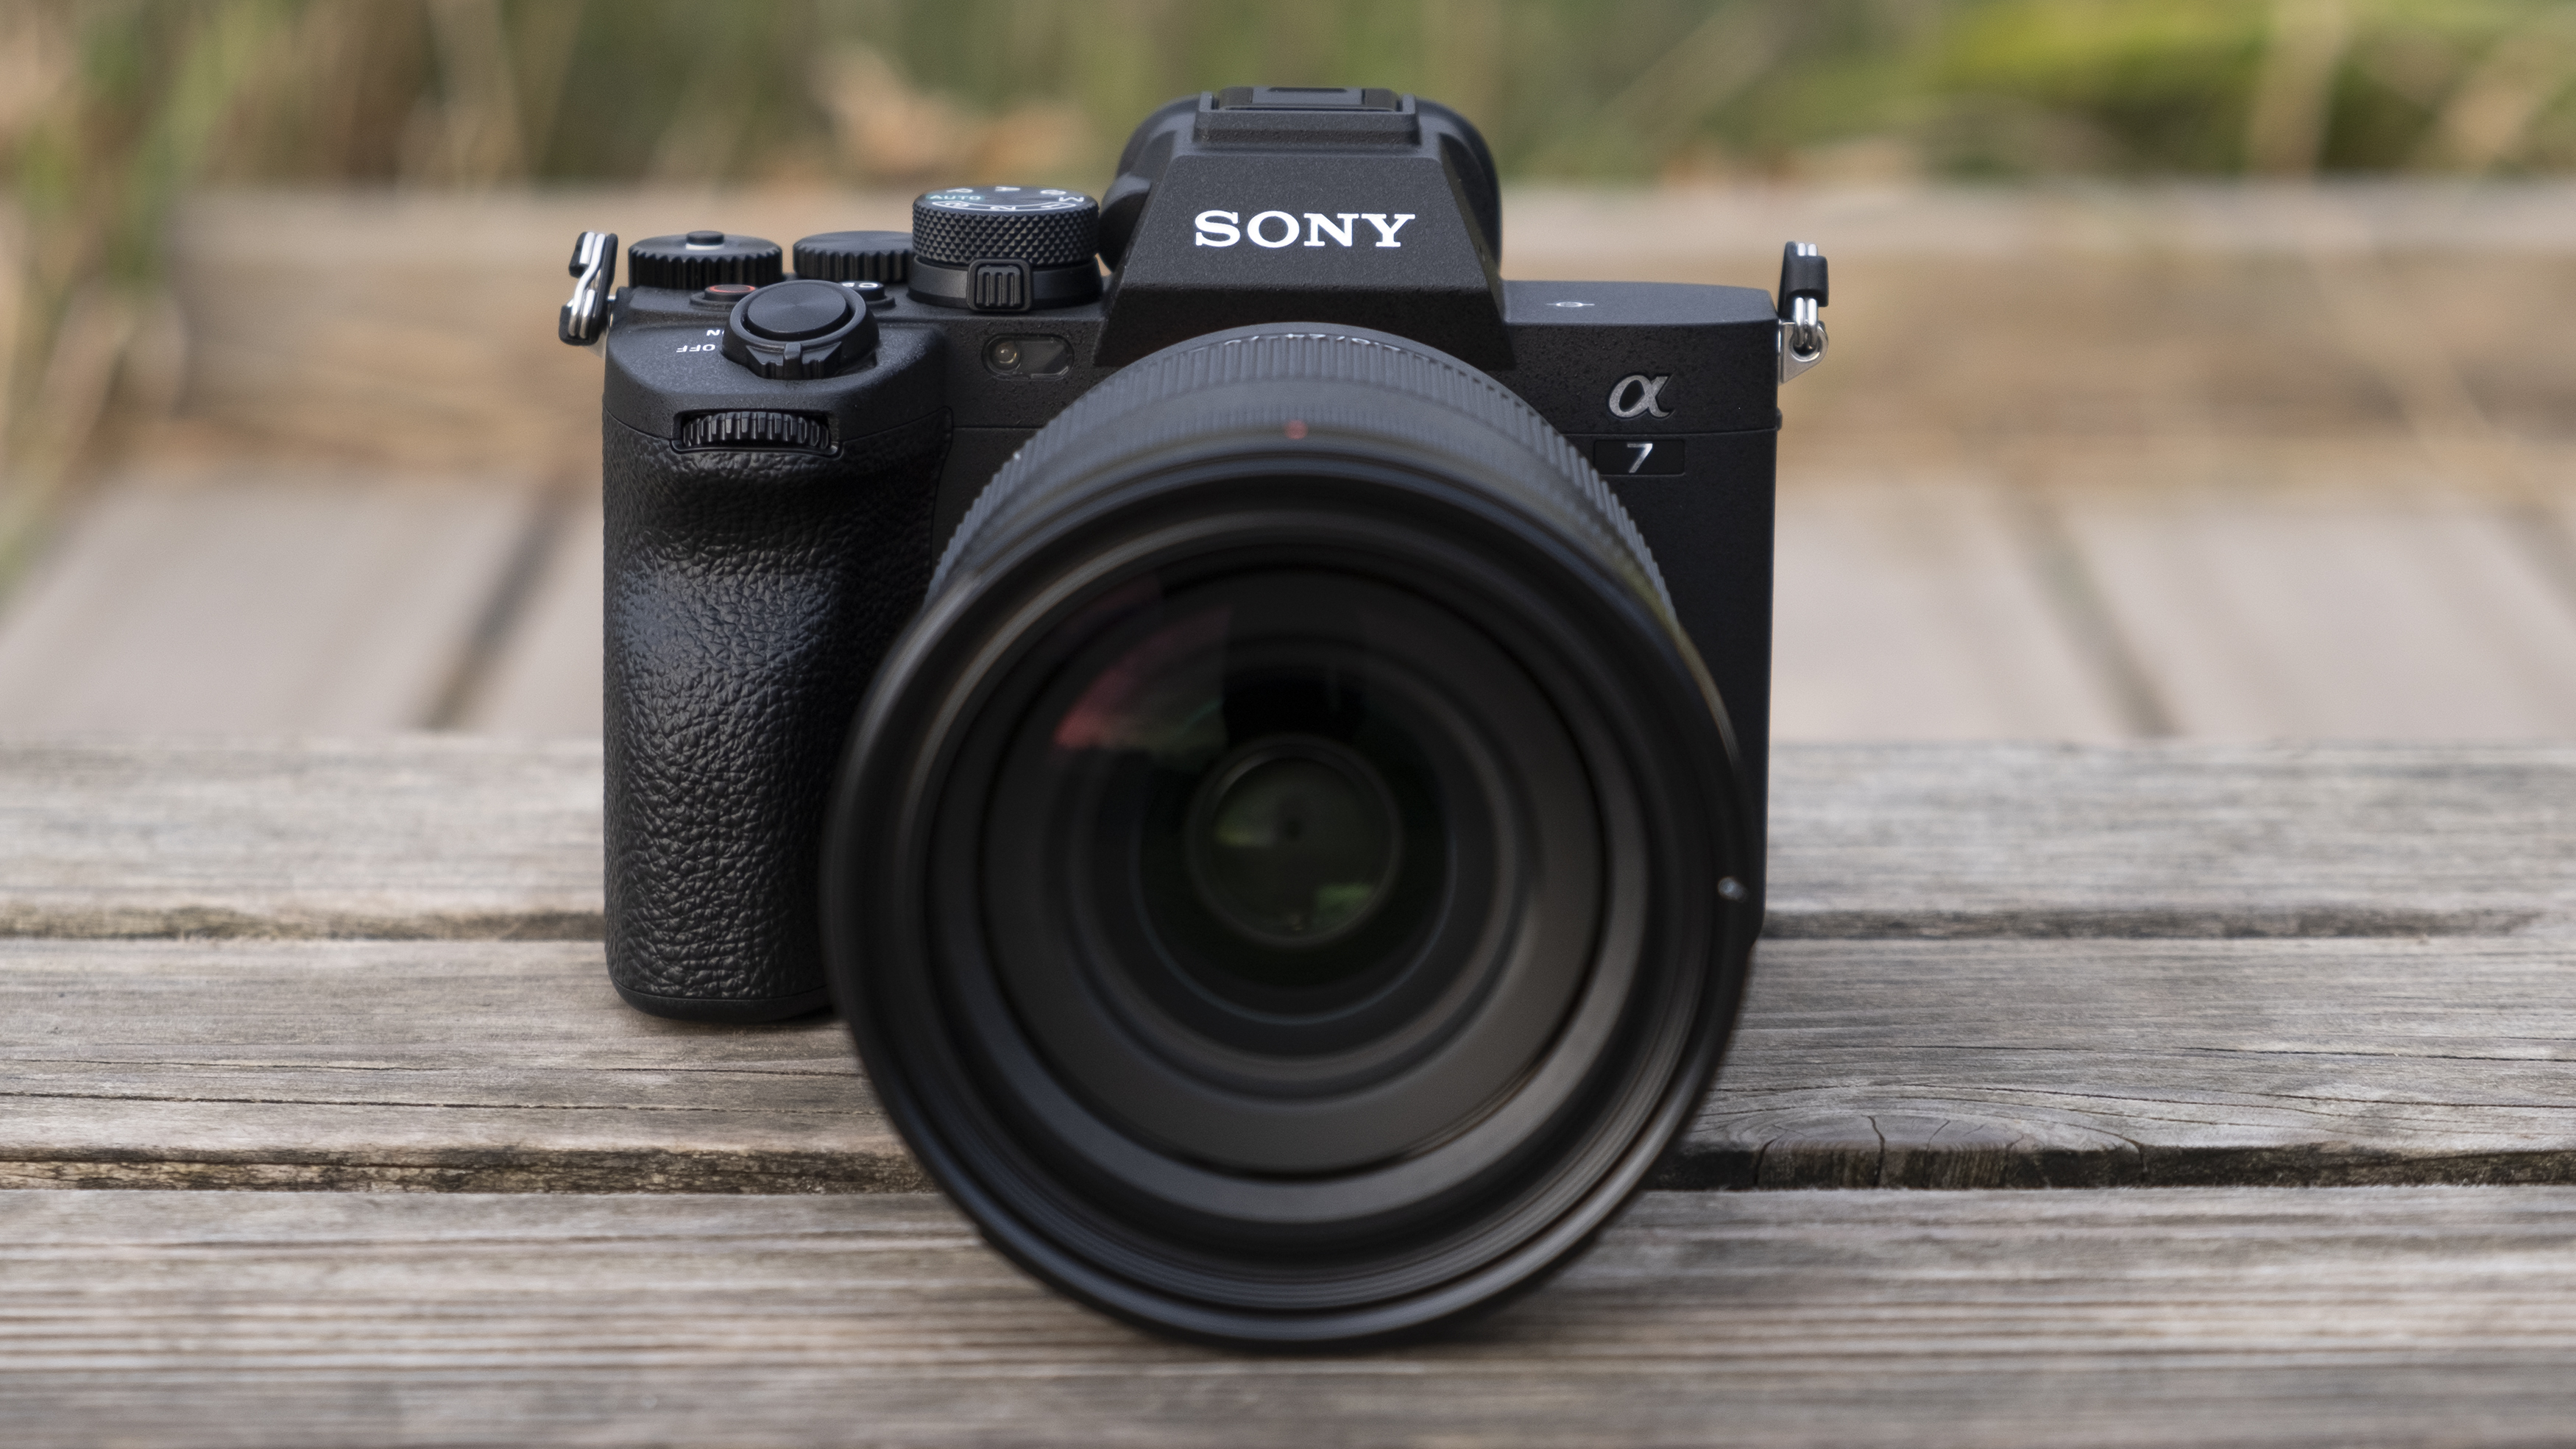 The front of the Sony A7 IV camera on a bench